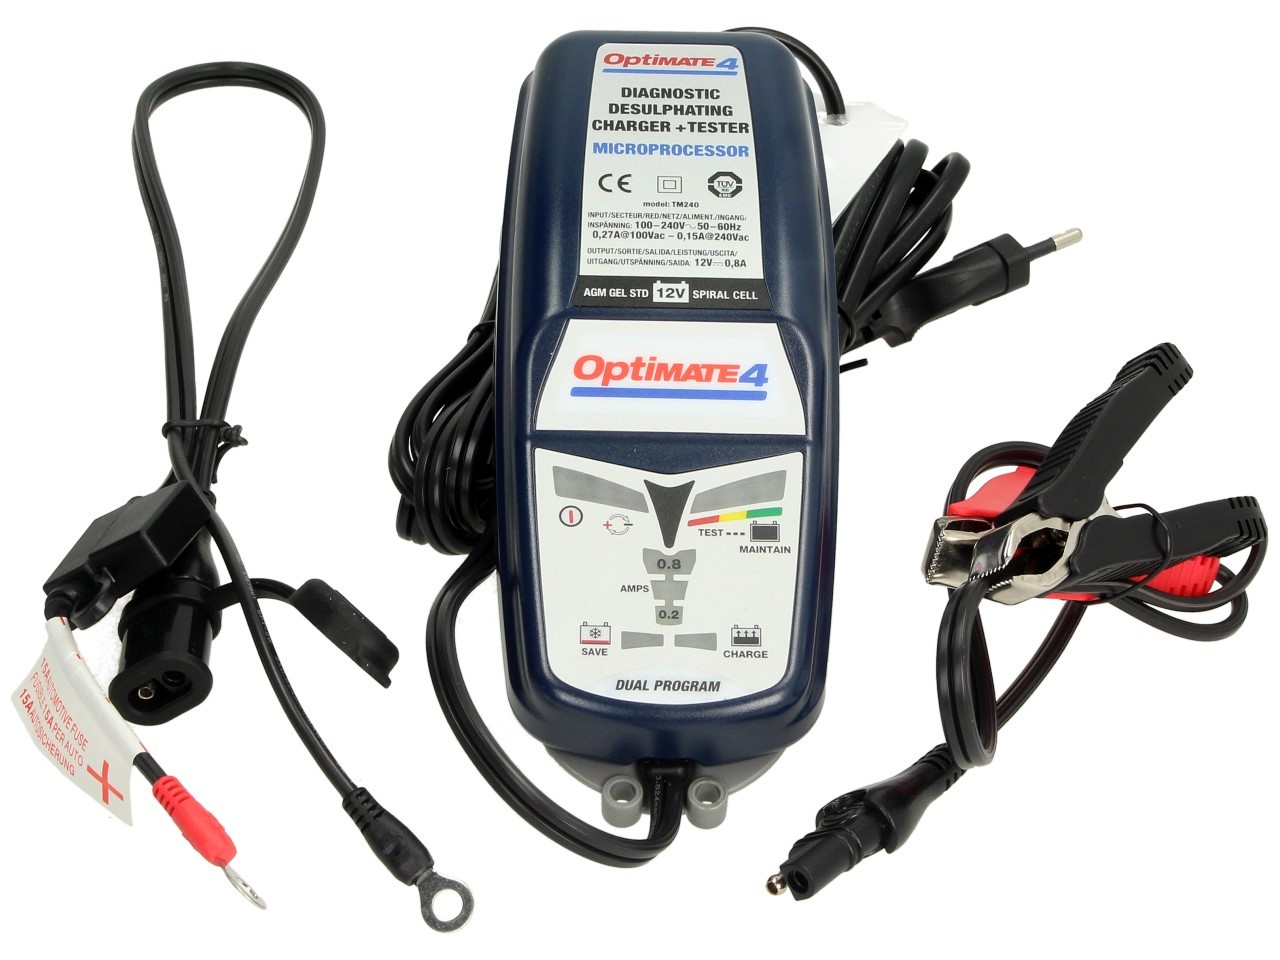 Econ battery charger, OptiMATE 4 DUAL